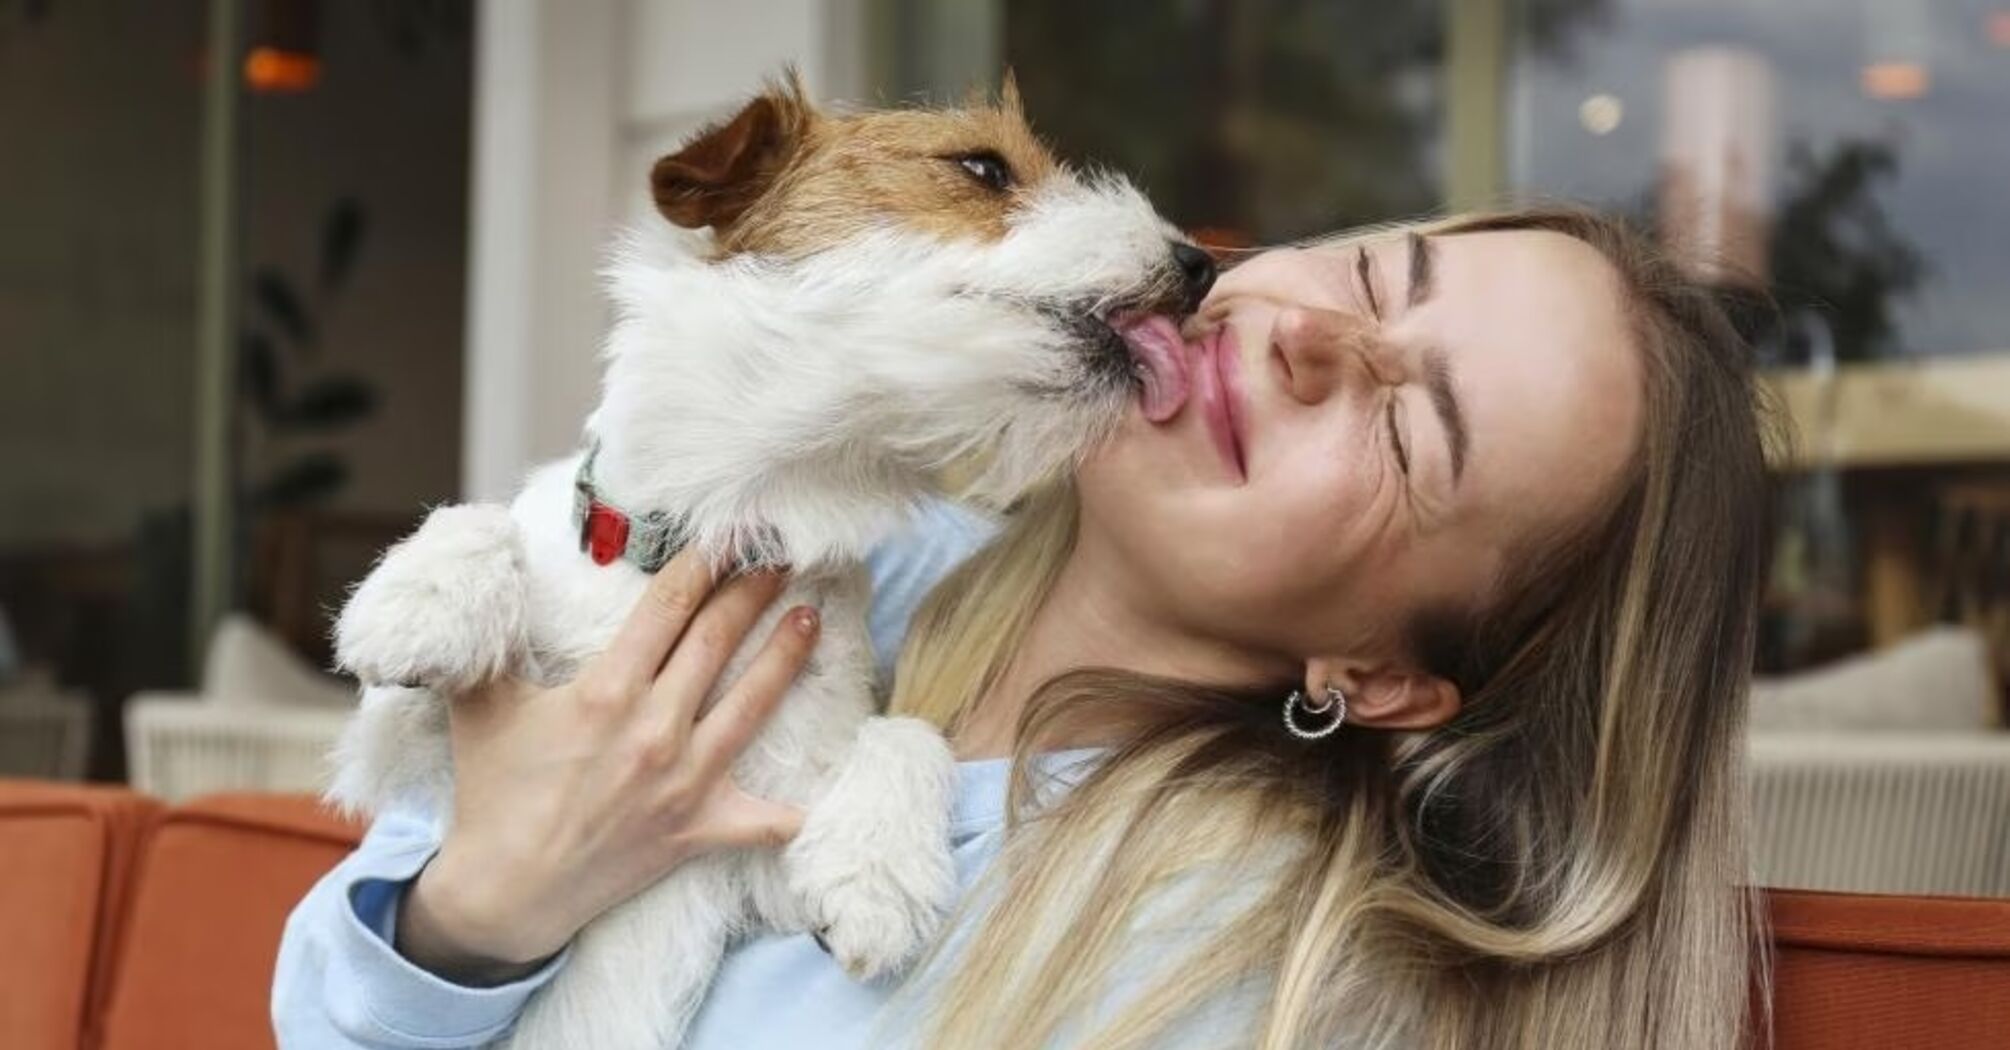 Scientists say whether you should let your dog lick your face